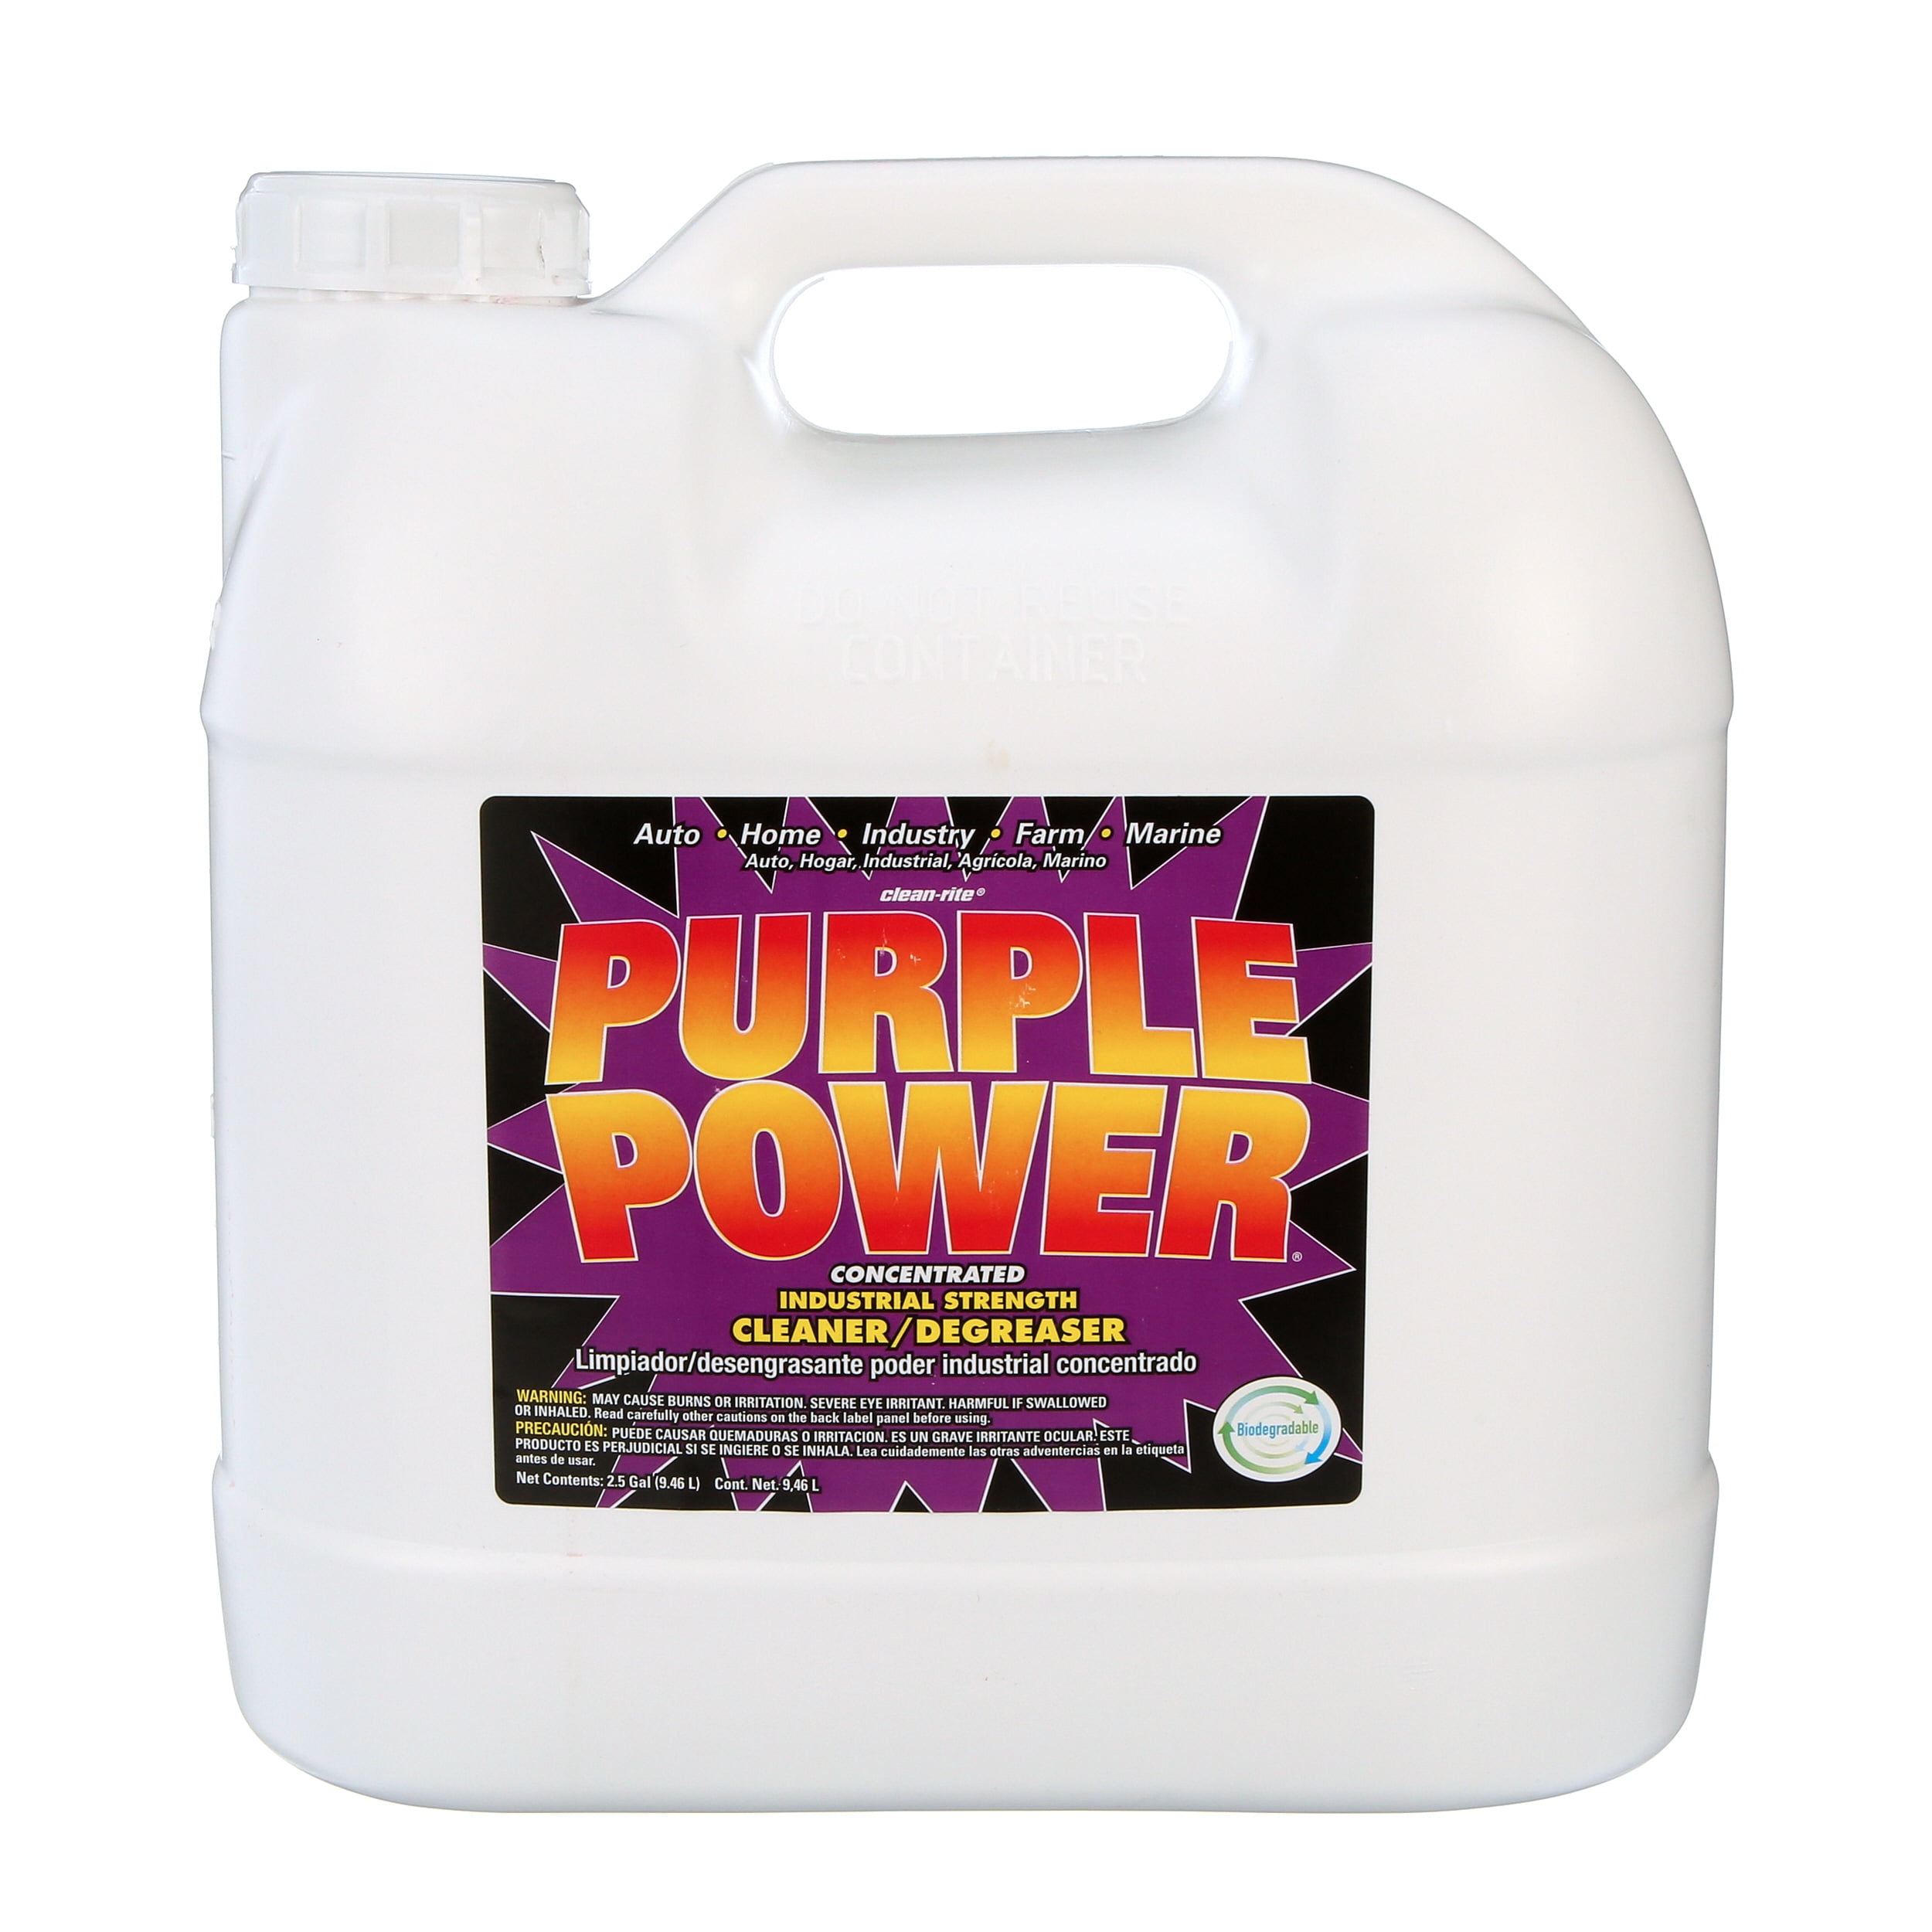 Purple Power Degreaser Concentrate, 2.5 Gallons